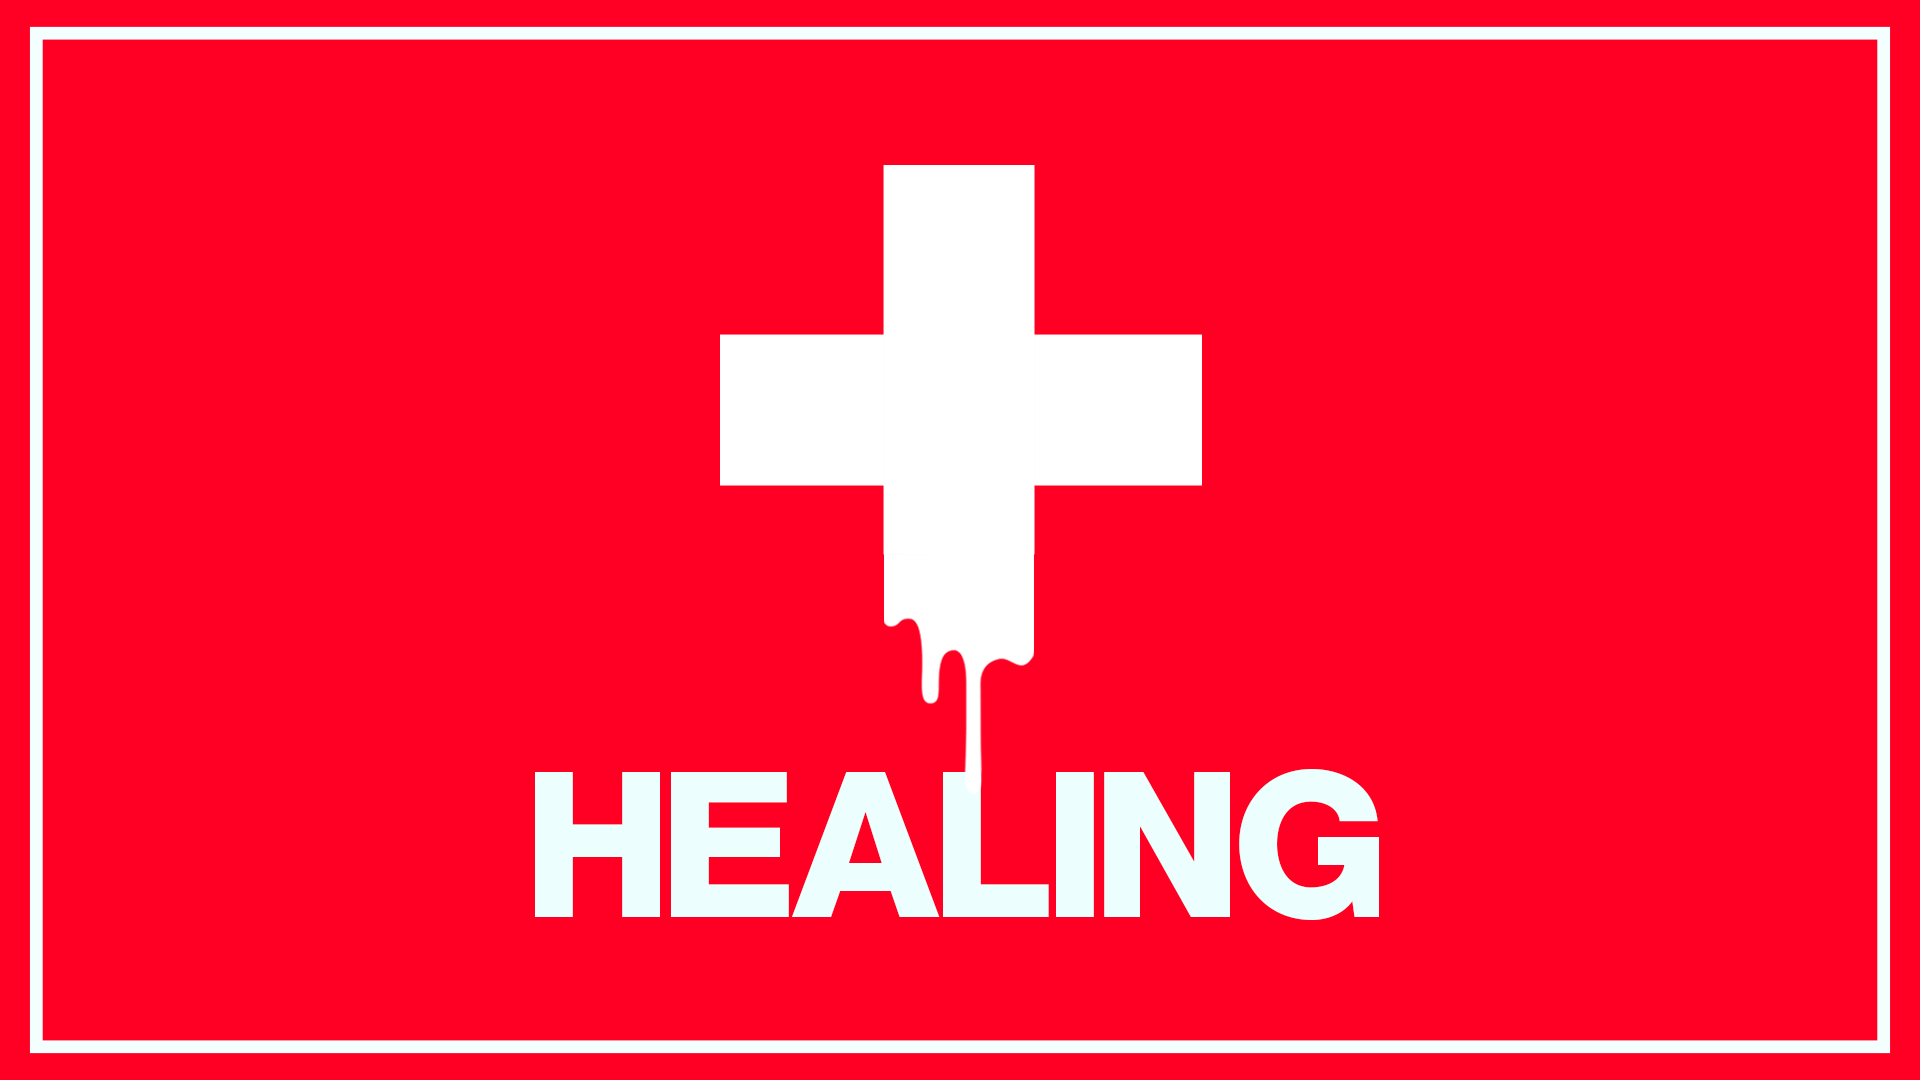 Cross emblem with reference to first aid symbol with drips added to signify the blood of Jesus